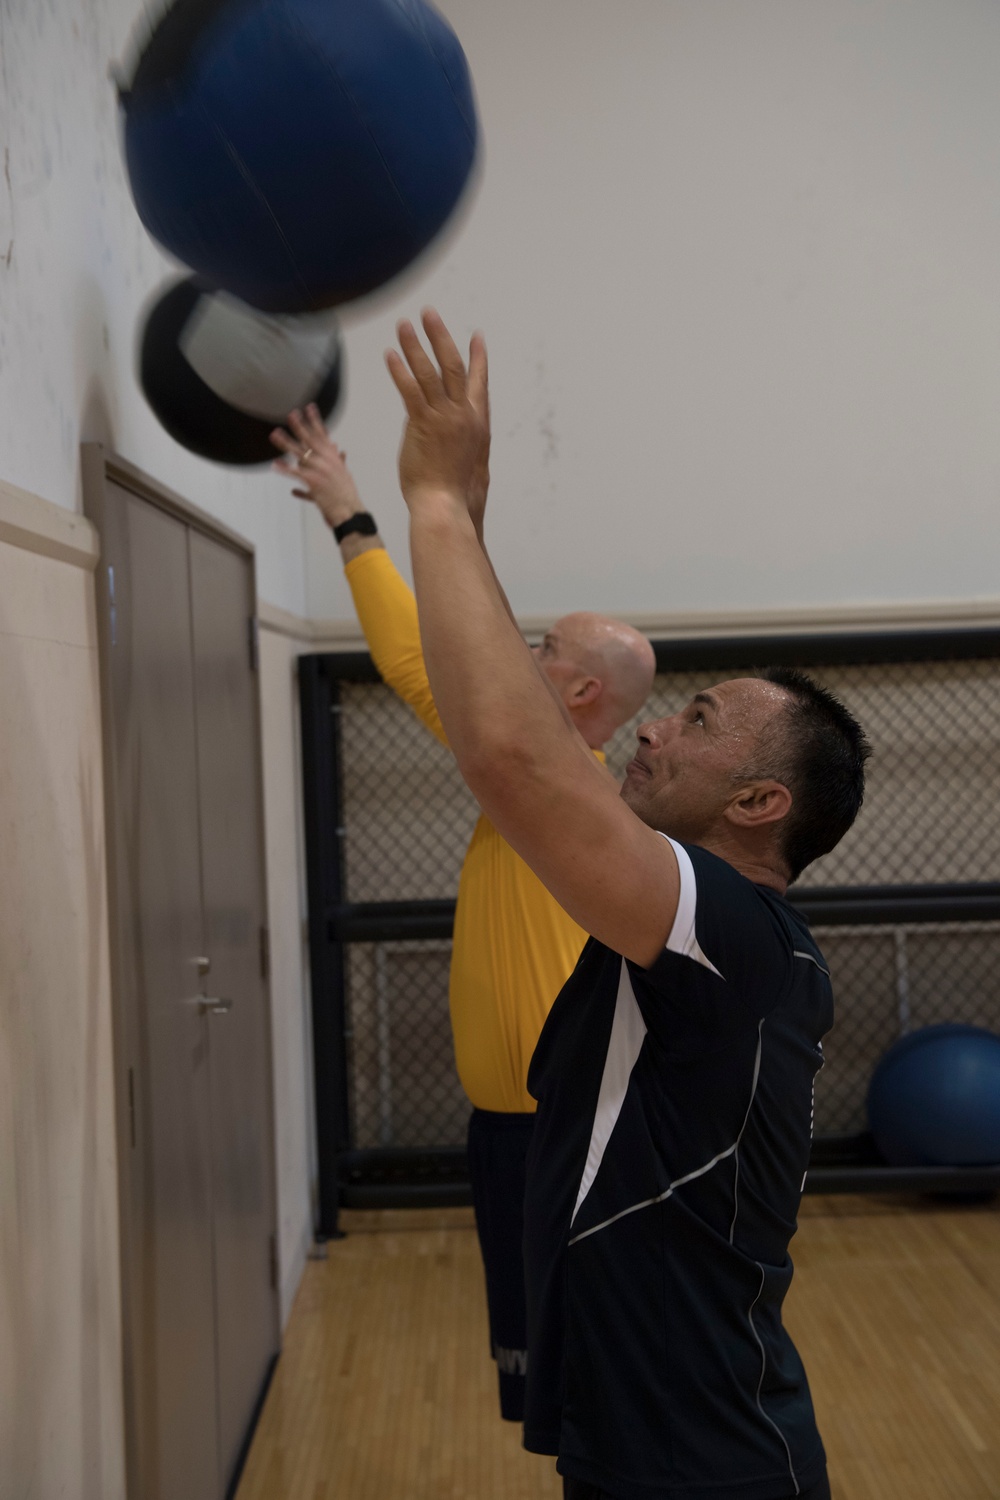 Sailors participates in the Sailor of the Year fitness challenge at the Hawk’s Nest fitness center in Fleet Activites Yokosuka during 7th fleet Sailor of the Year competition.